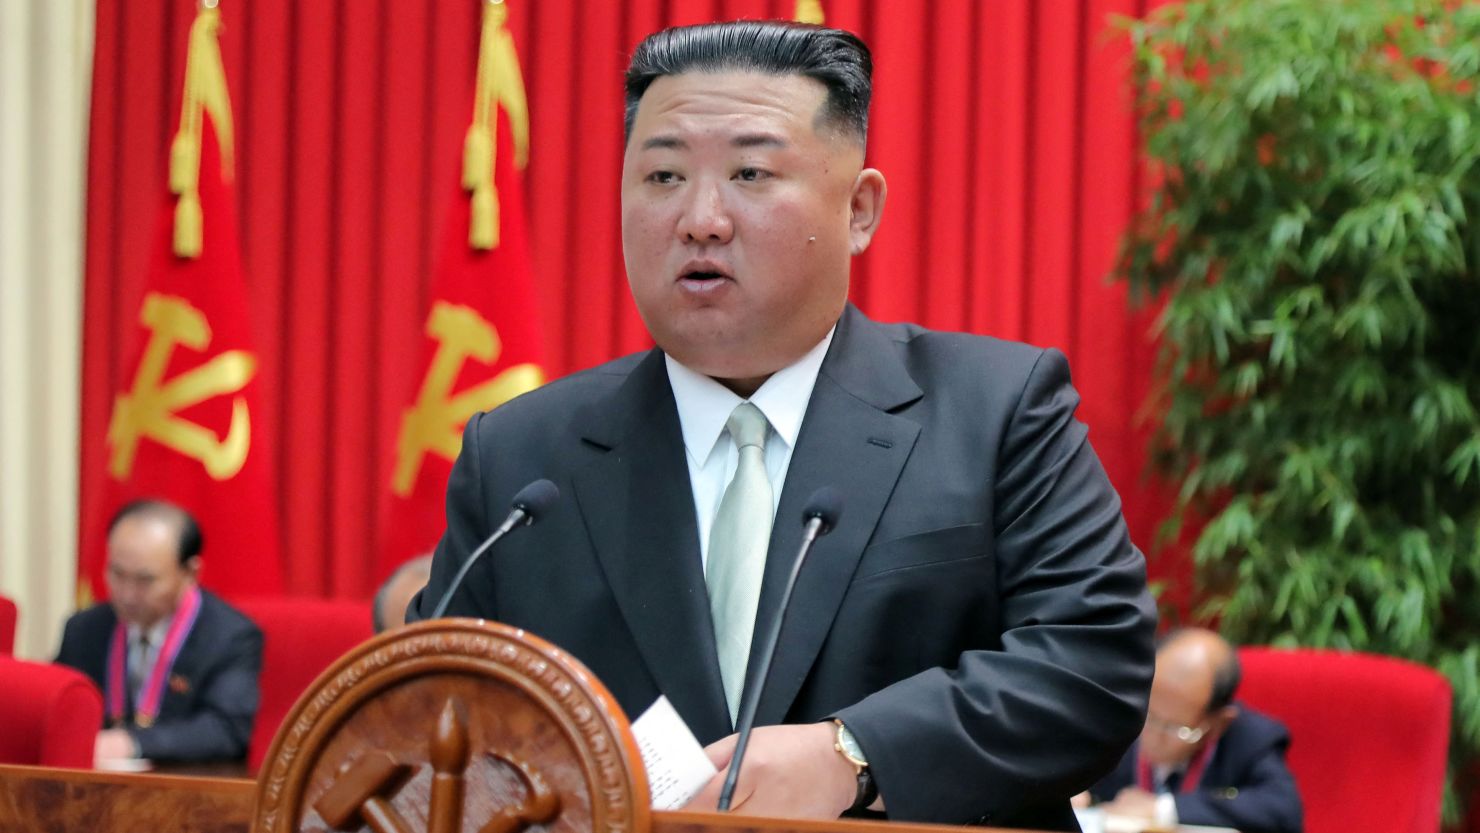 North Korean leader Kim Jong-un speaks during a visit to the Central Officers School of the ruling Workers' Party in Pyongyang, North Korea, in this undated photo released on October 18, 2022. 